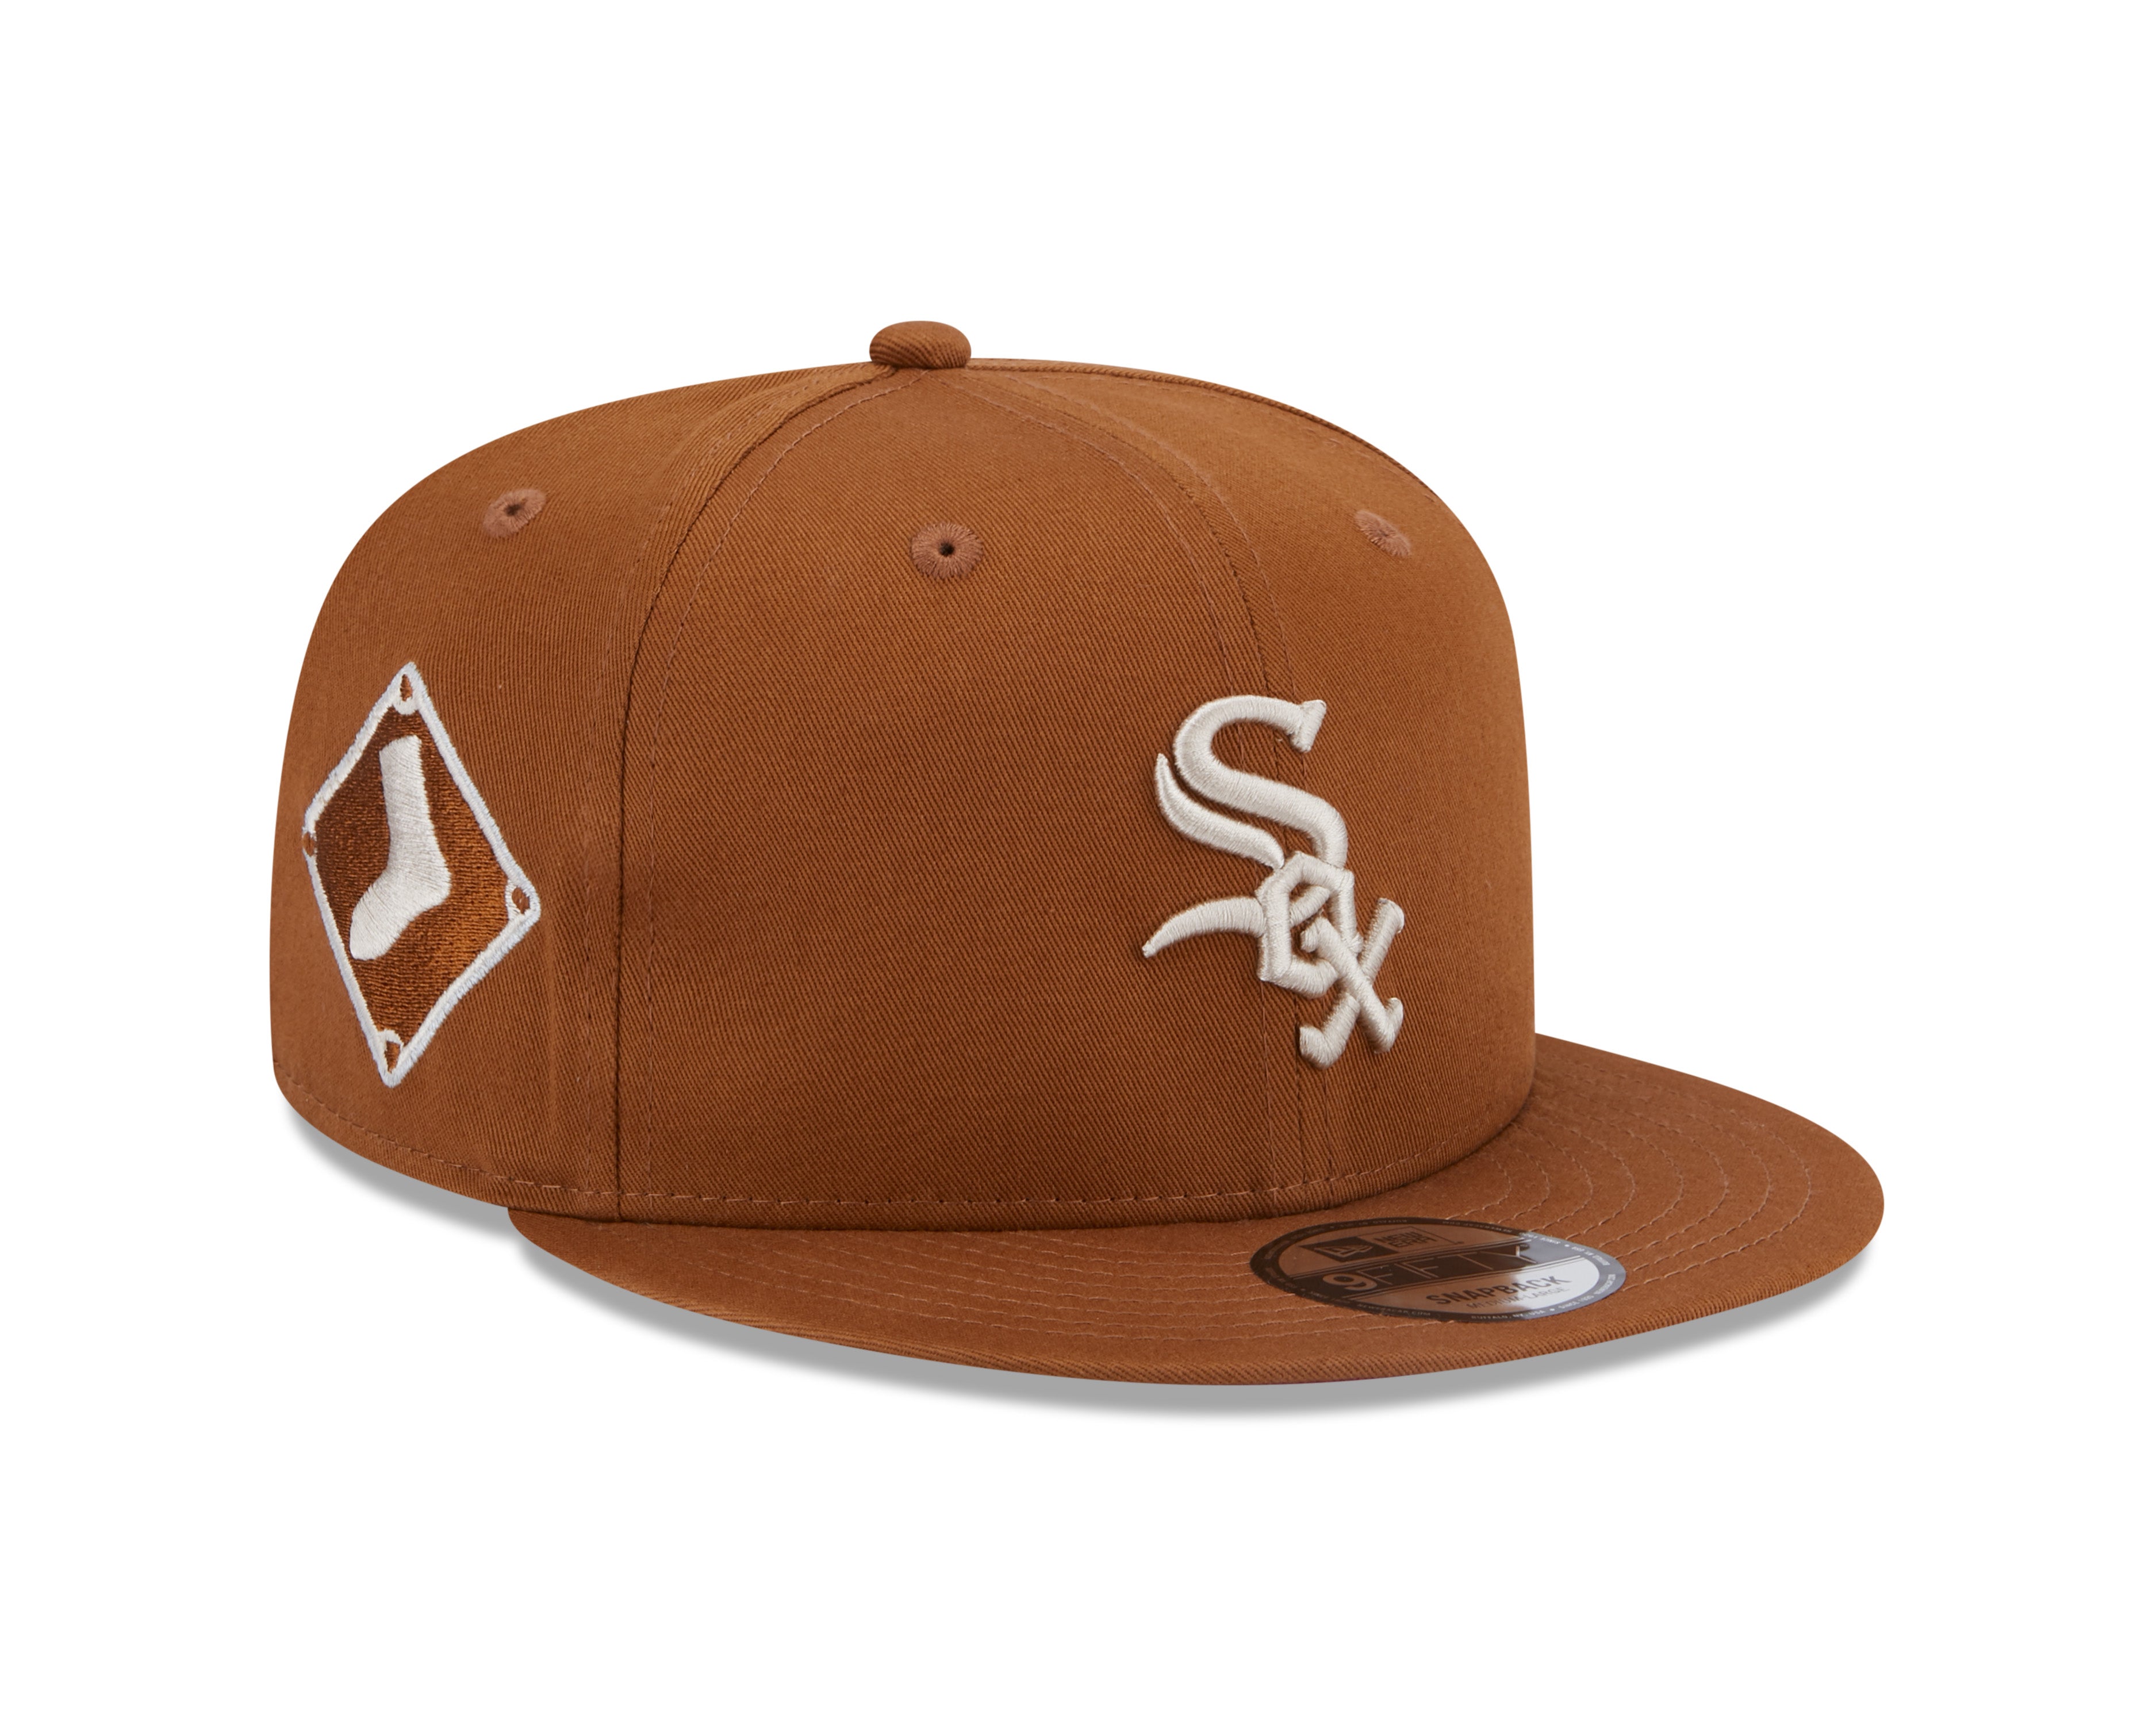 New Era 9Fifty Side Patch Chicago White Sox - Brown - Headz Up 